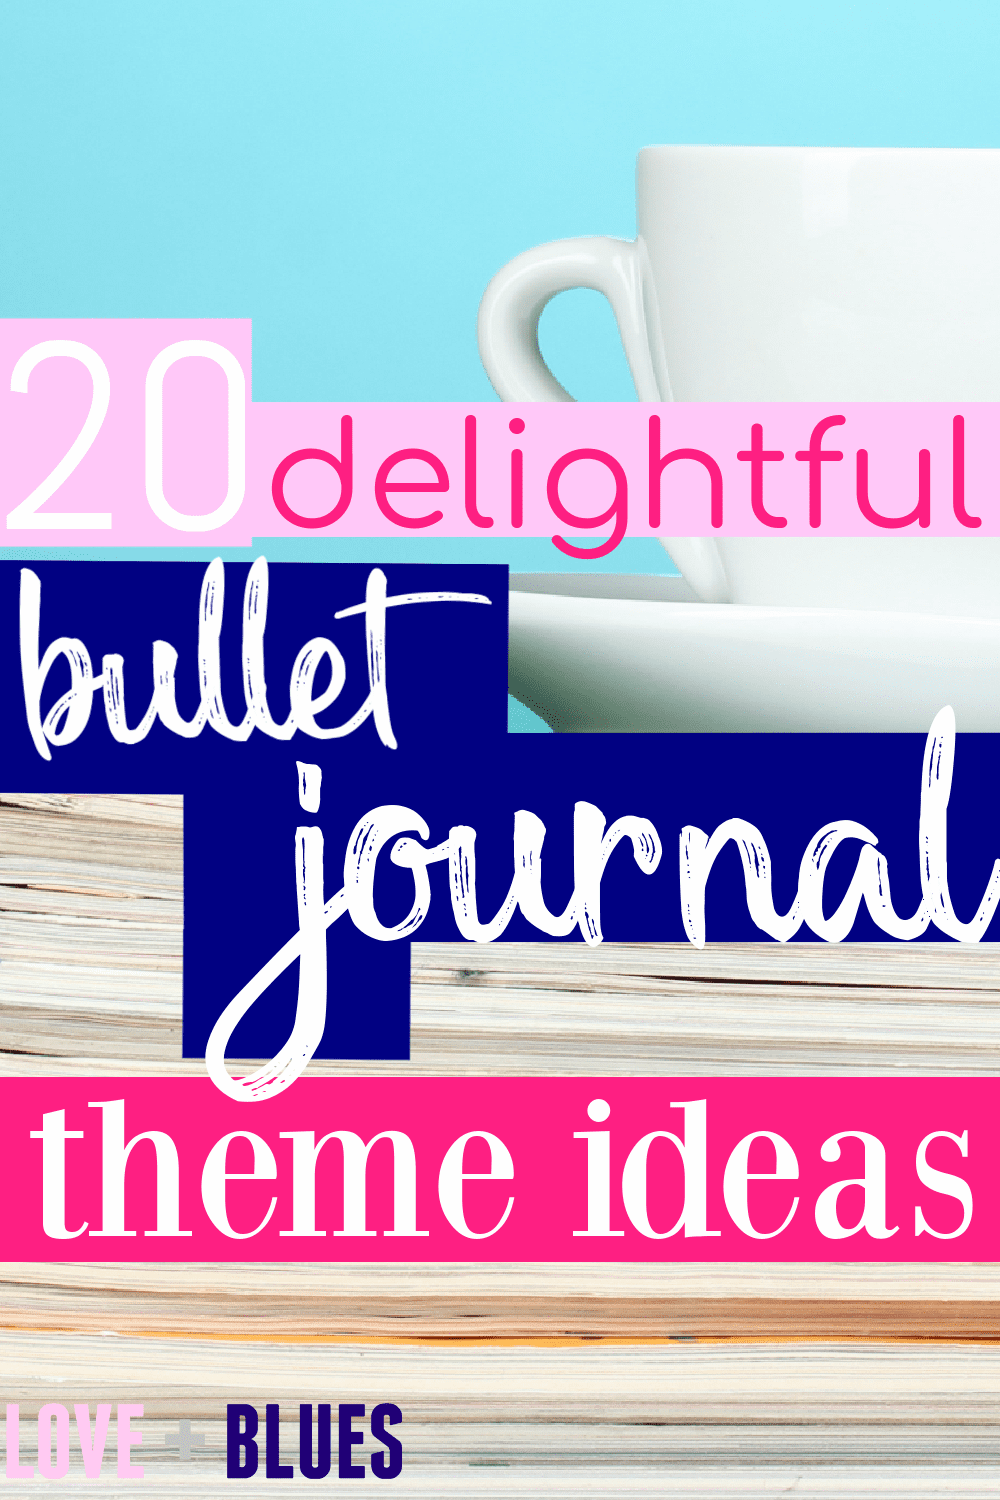 These are super fun bullet journal theme ideas! Must try some of them.